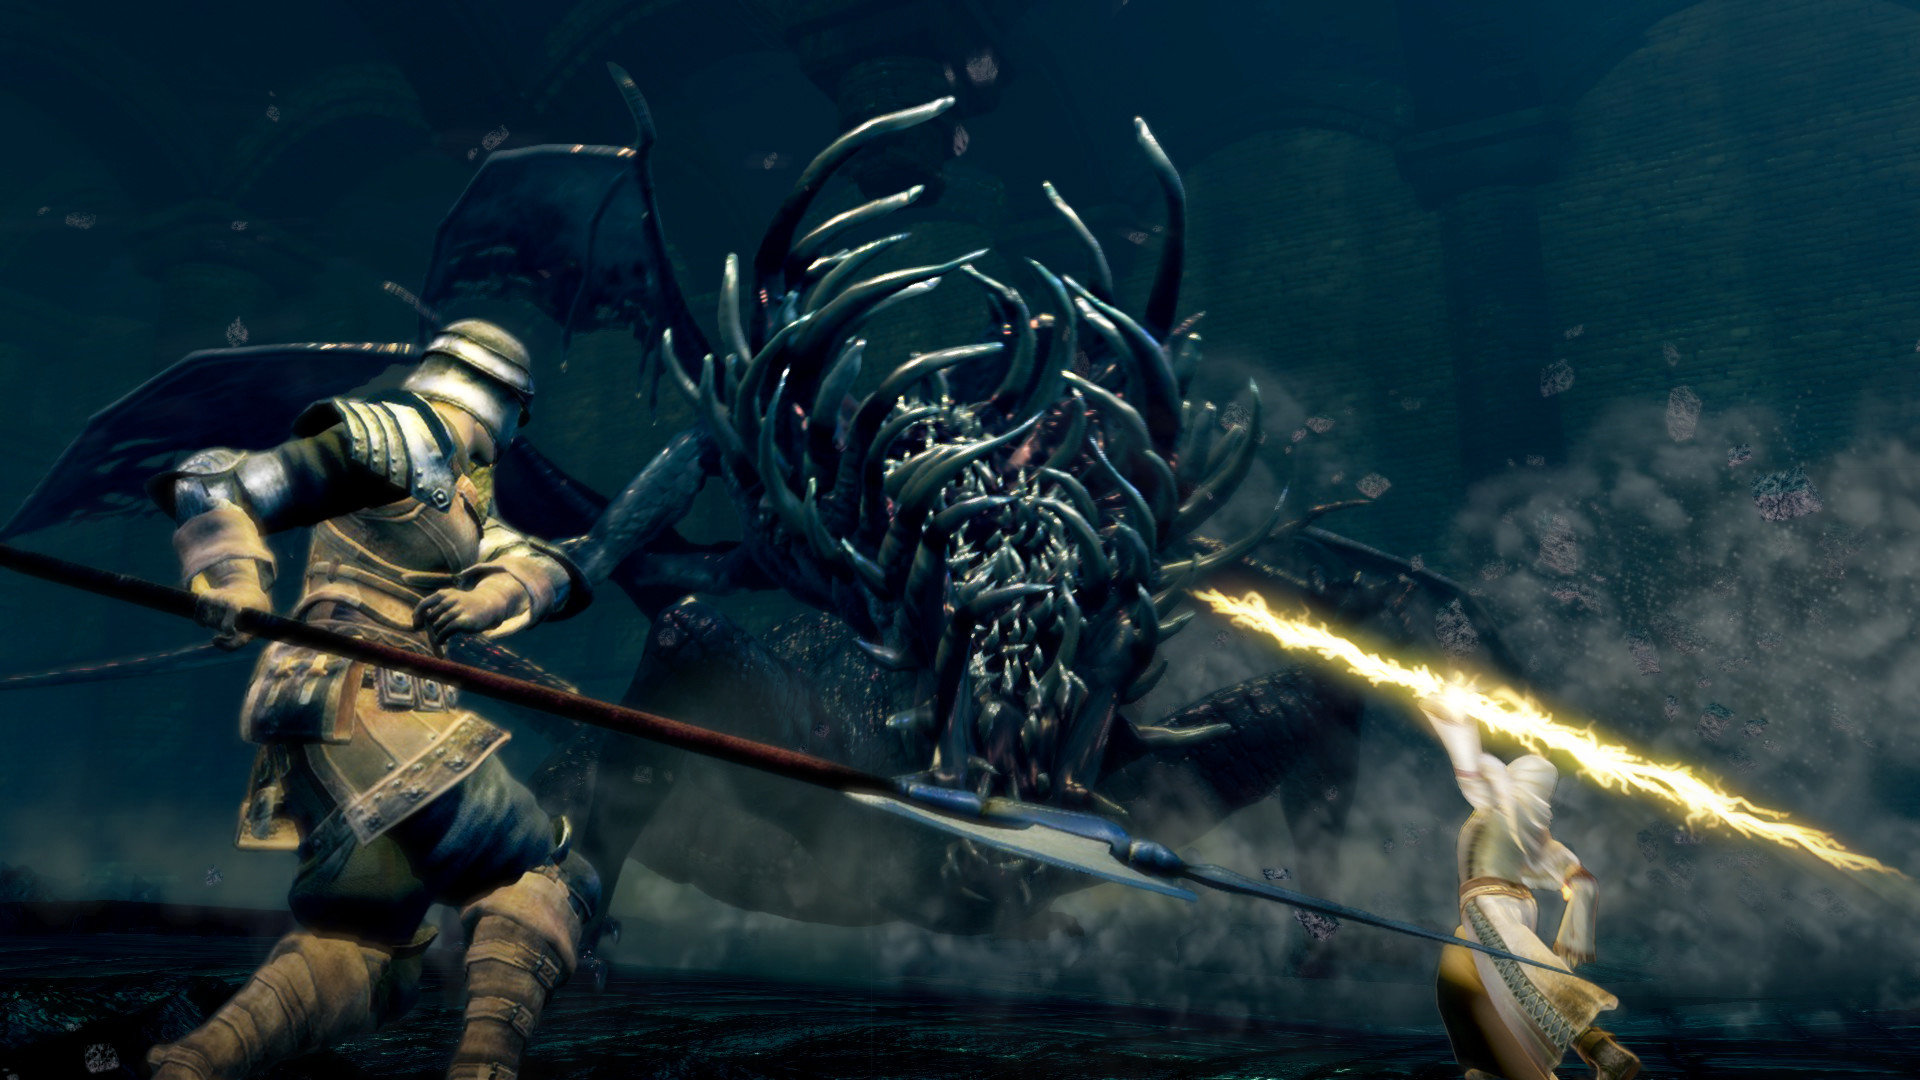 Bandai Namco Europe and FromSoftware announce new action game